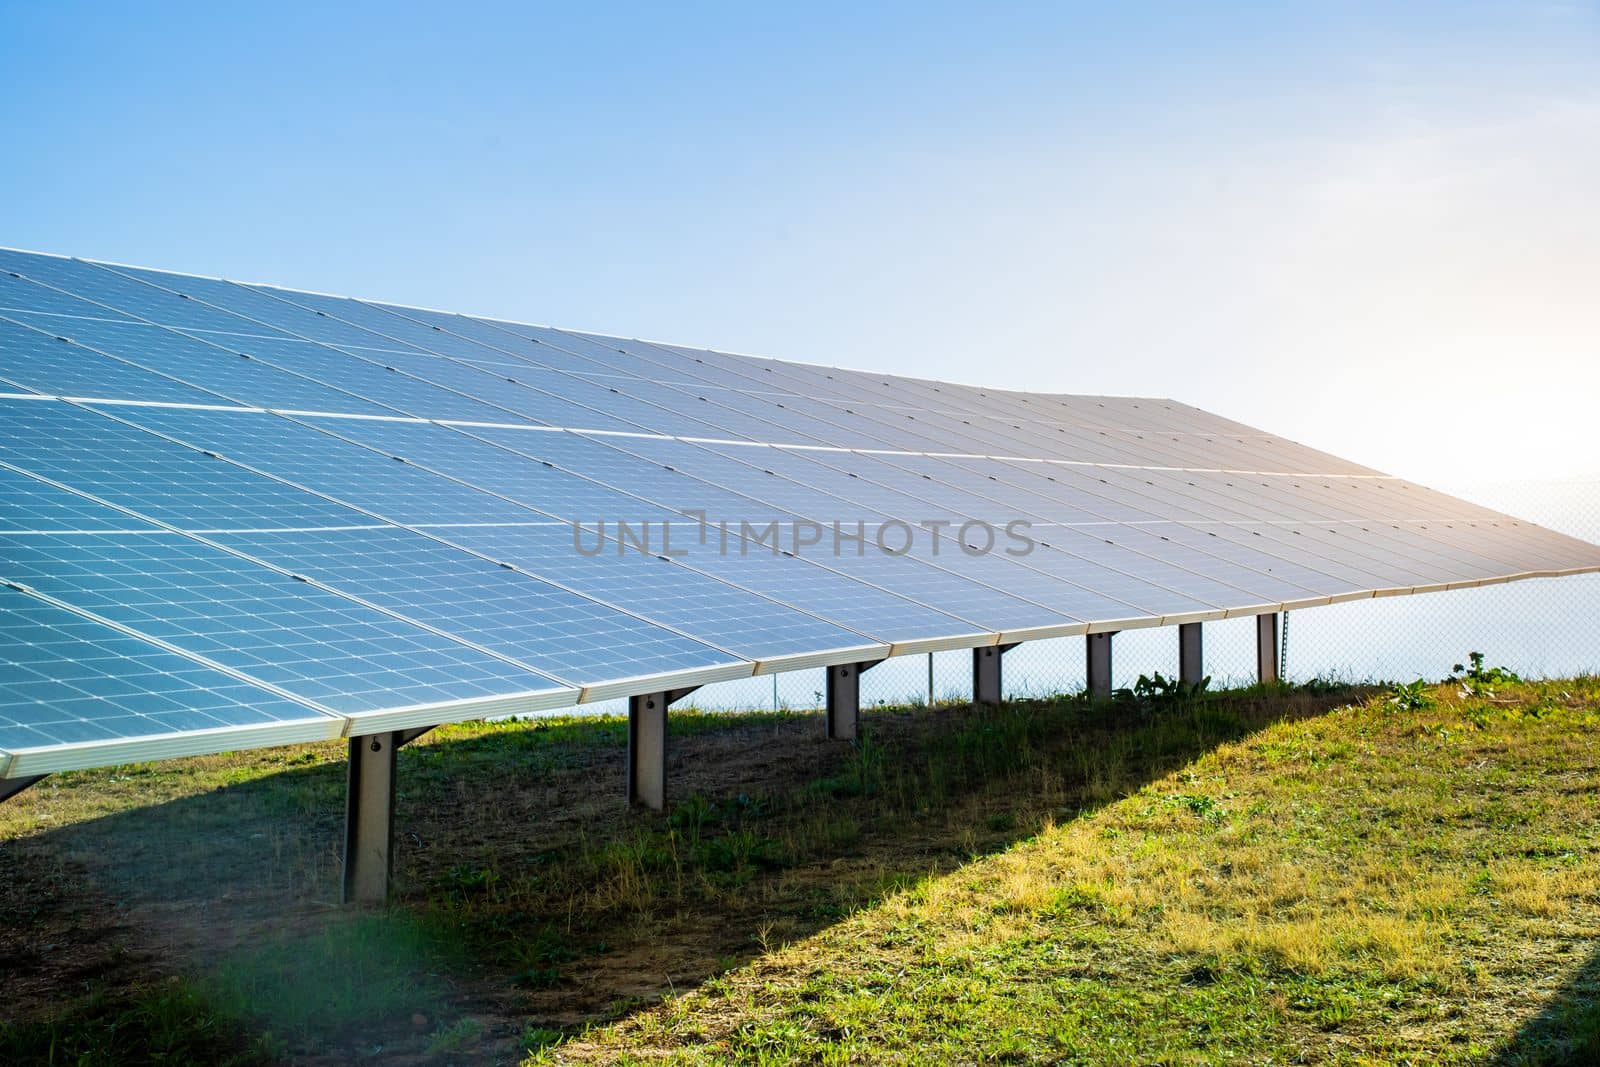 Solar panels system in a green field with blue sky and the sun. Renewable and sustainable energy by PaulCarr